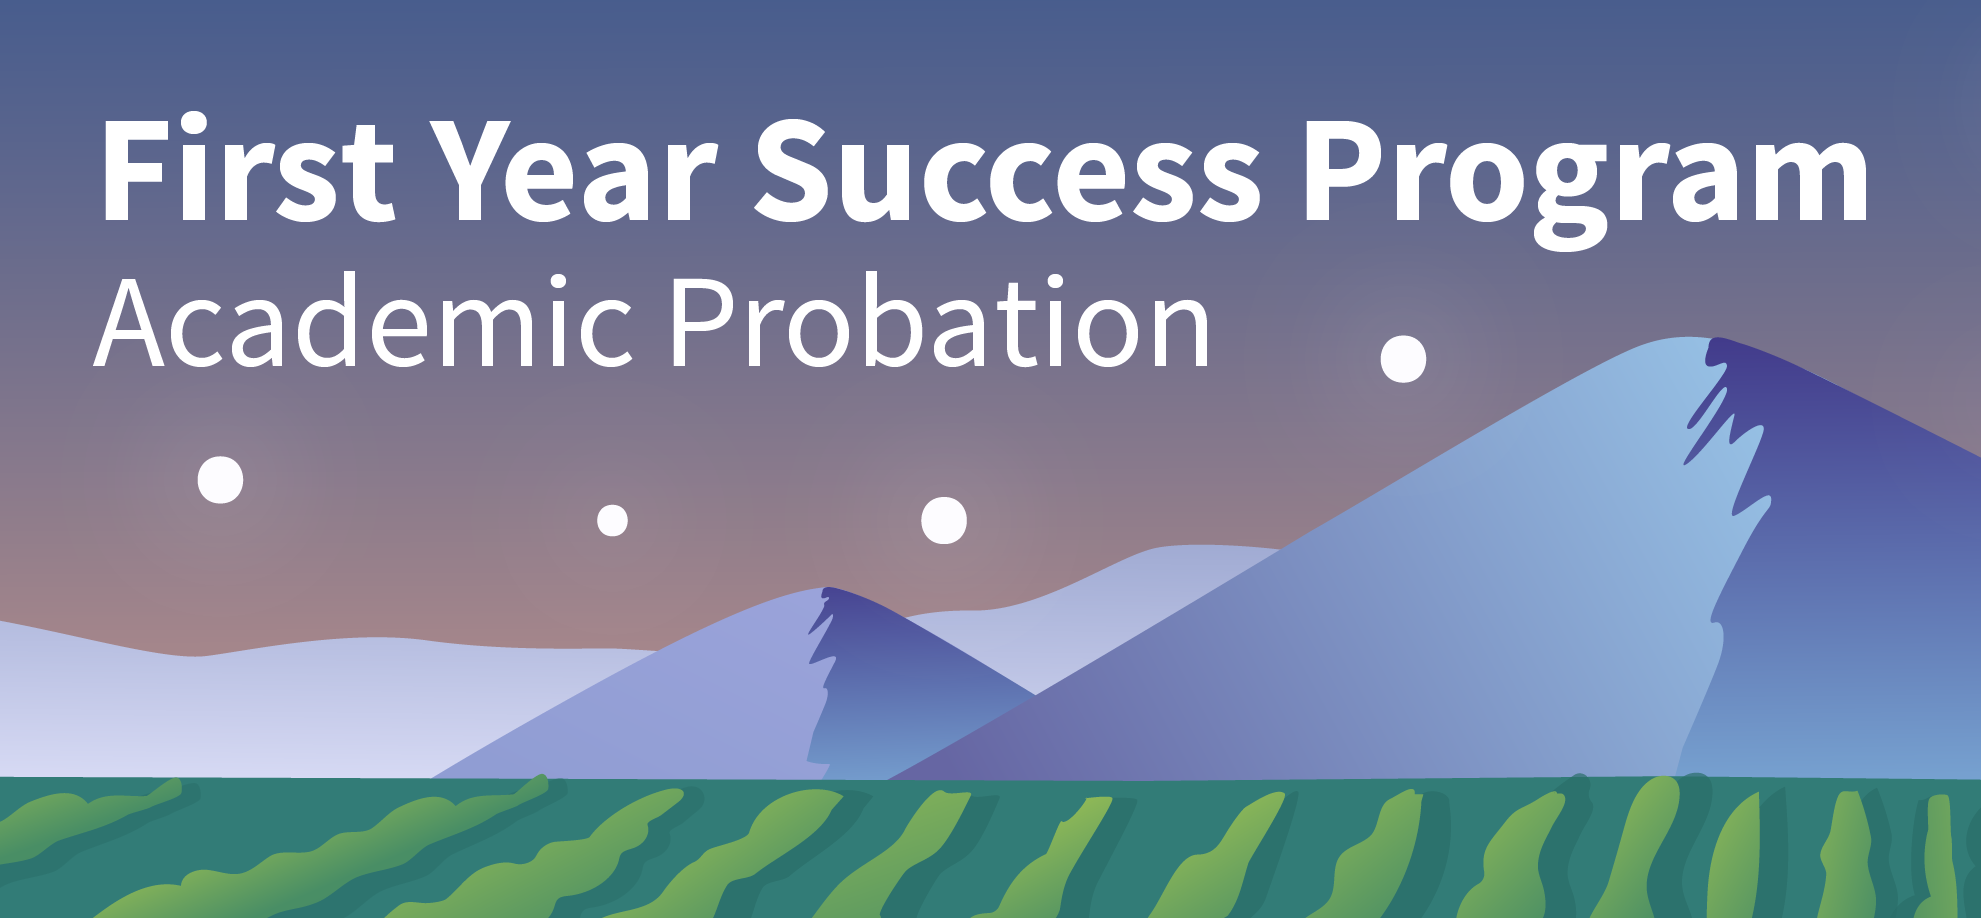 Illustration of hills with text reading First Year Success Program Academic Probation